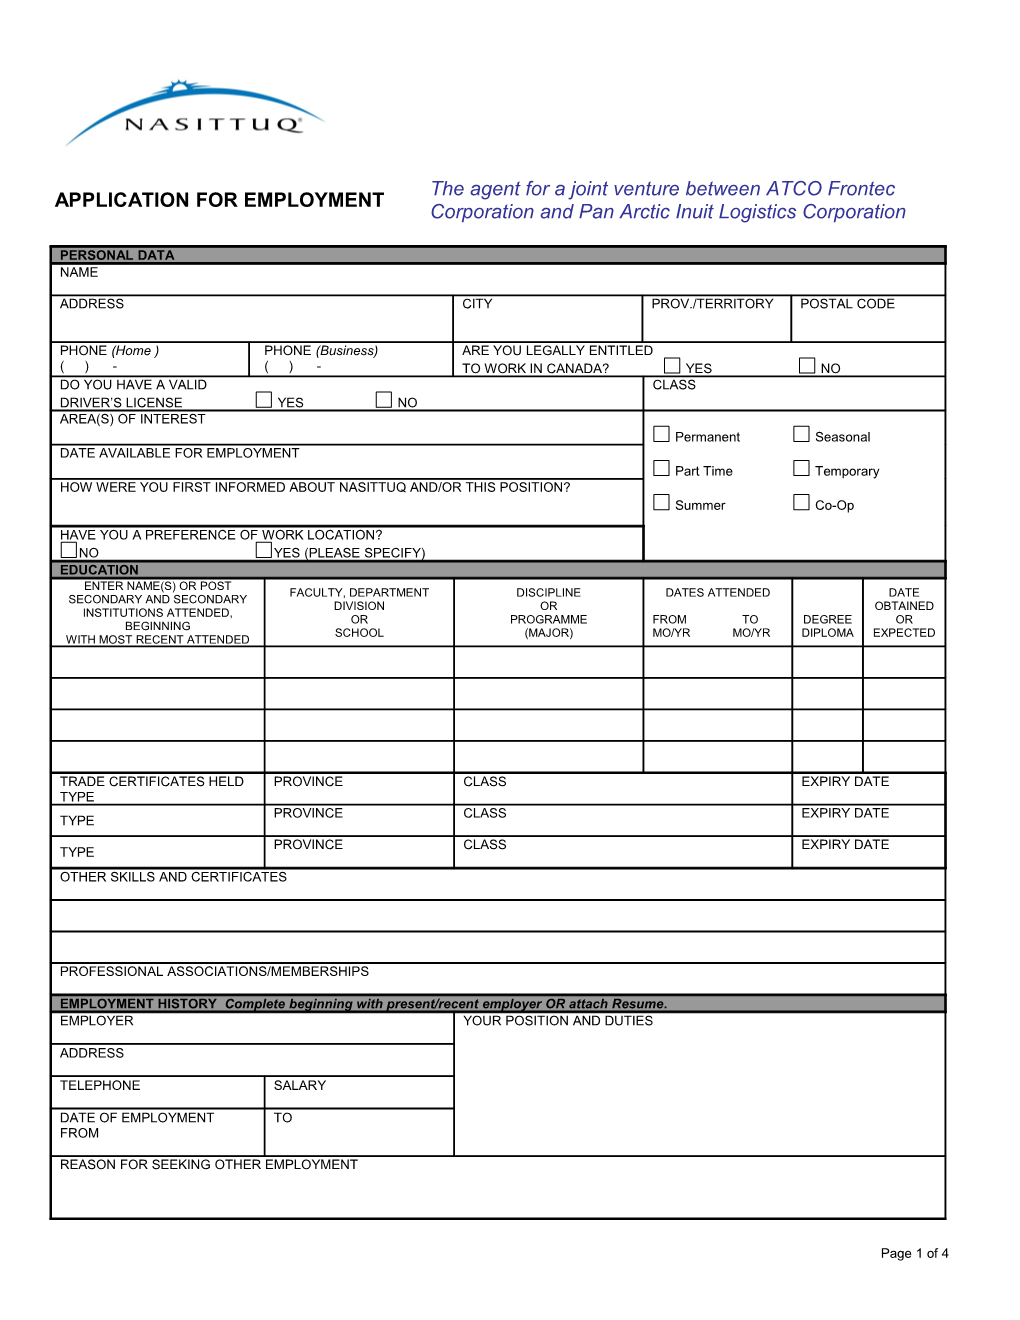 Applications for Employment